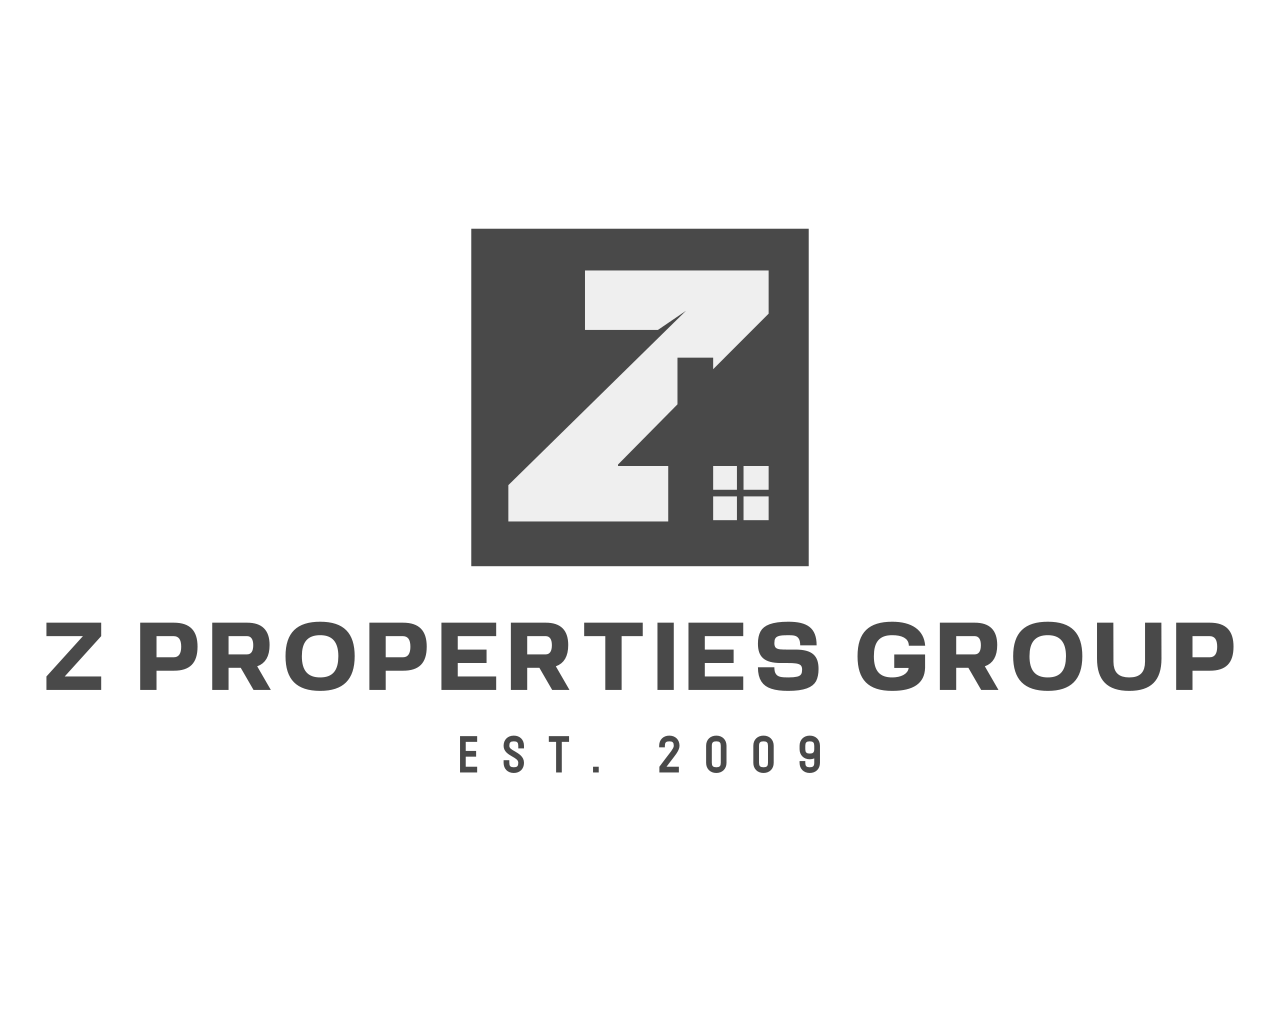 Z Properties Group Logo - Click to go to home page